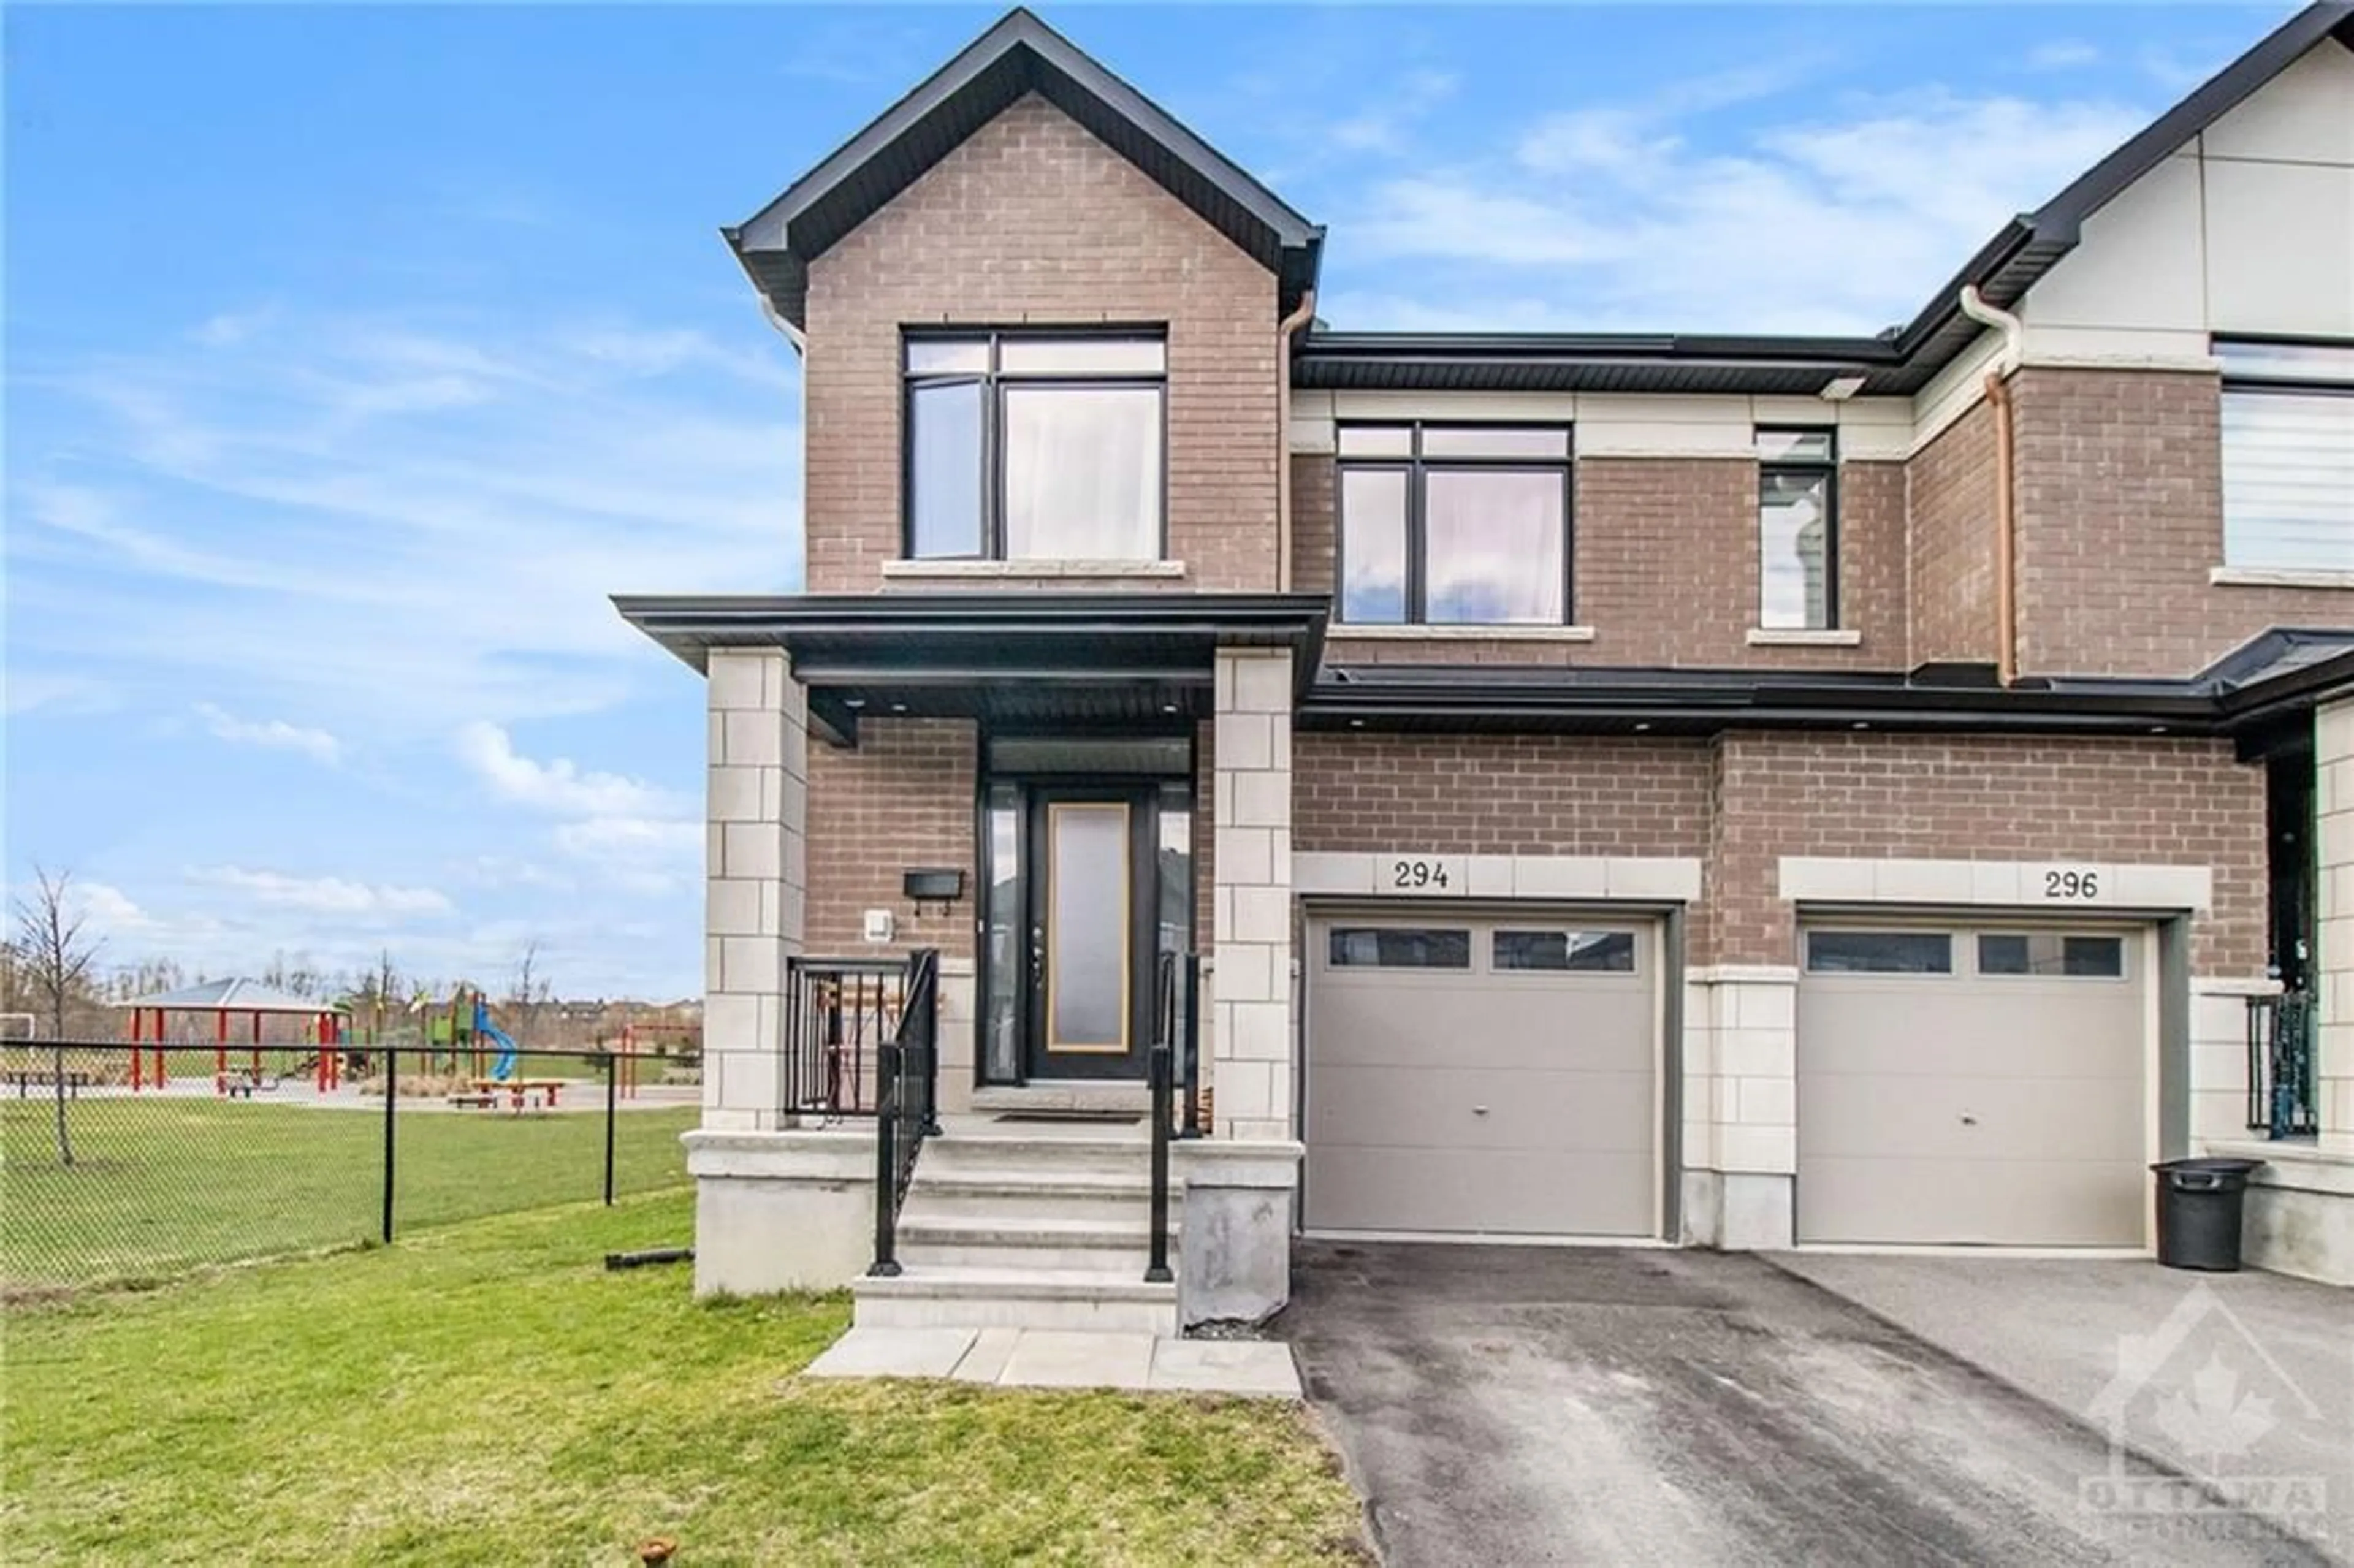 Home with brick exterior material for 294 JOSHUA St, Ottawa Ontario K1W 0N8